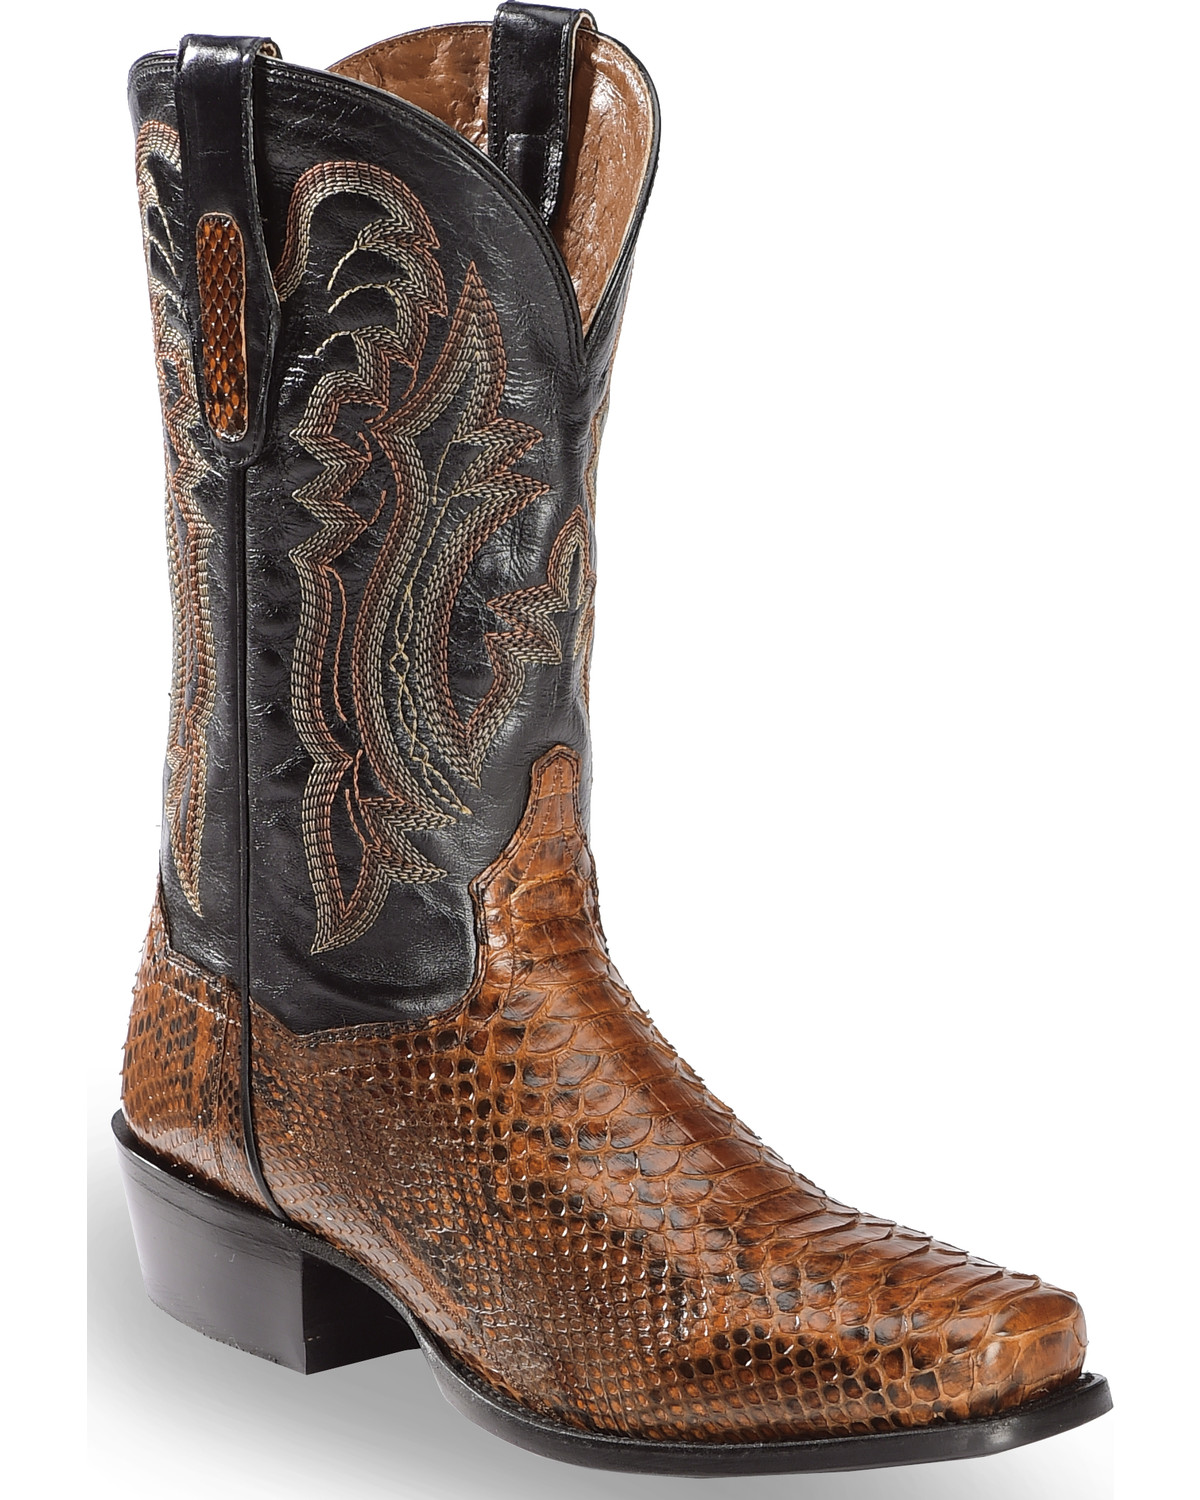 snakeskin square toe cowboy boots